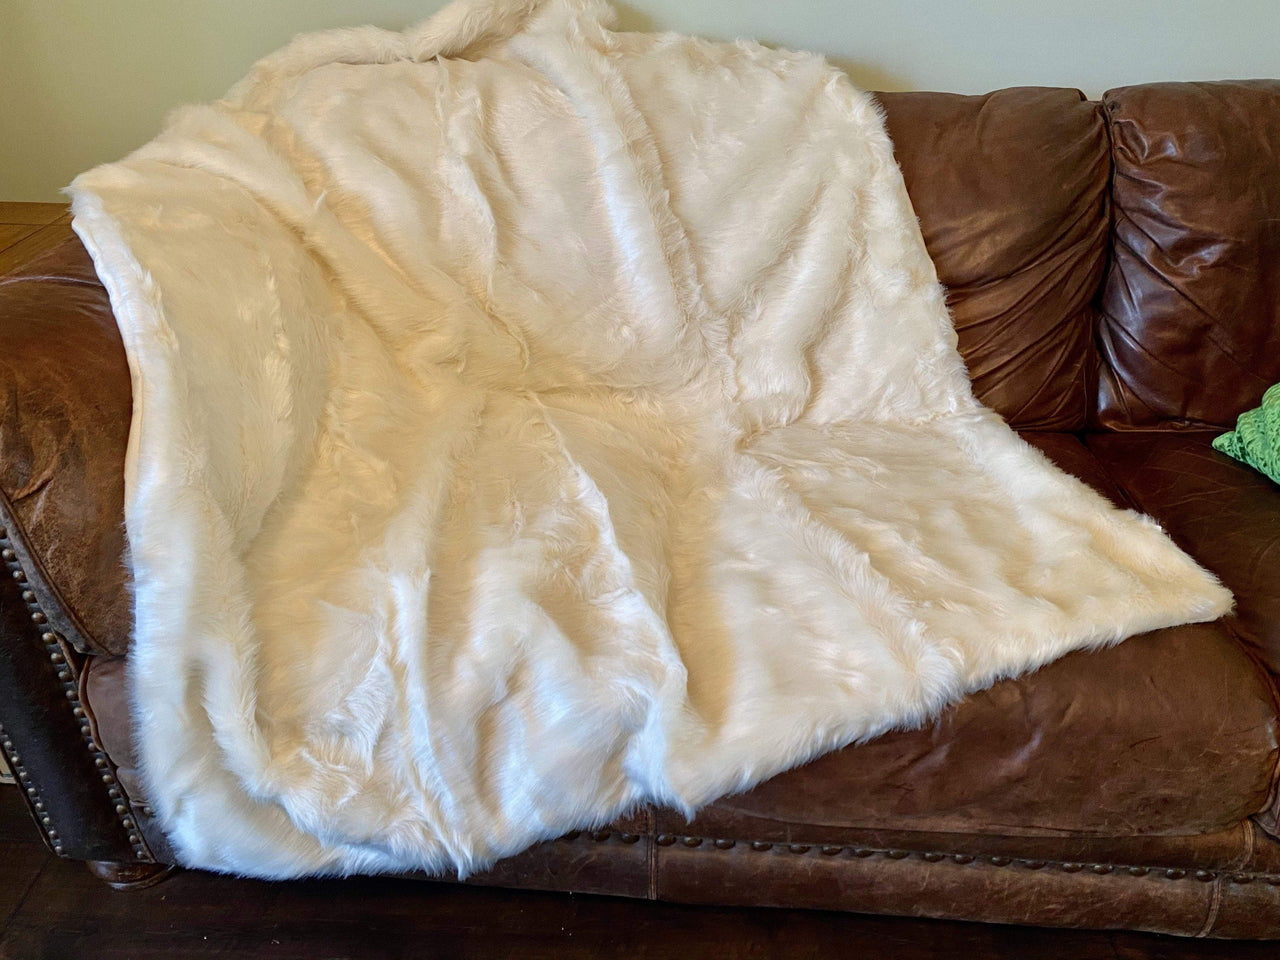 Waterproof Faux Fur Throw Blanket Blankets Bullybeds.com Large 60"x52" White 